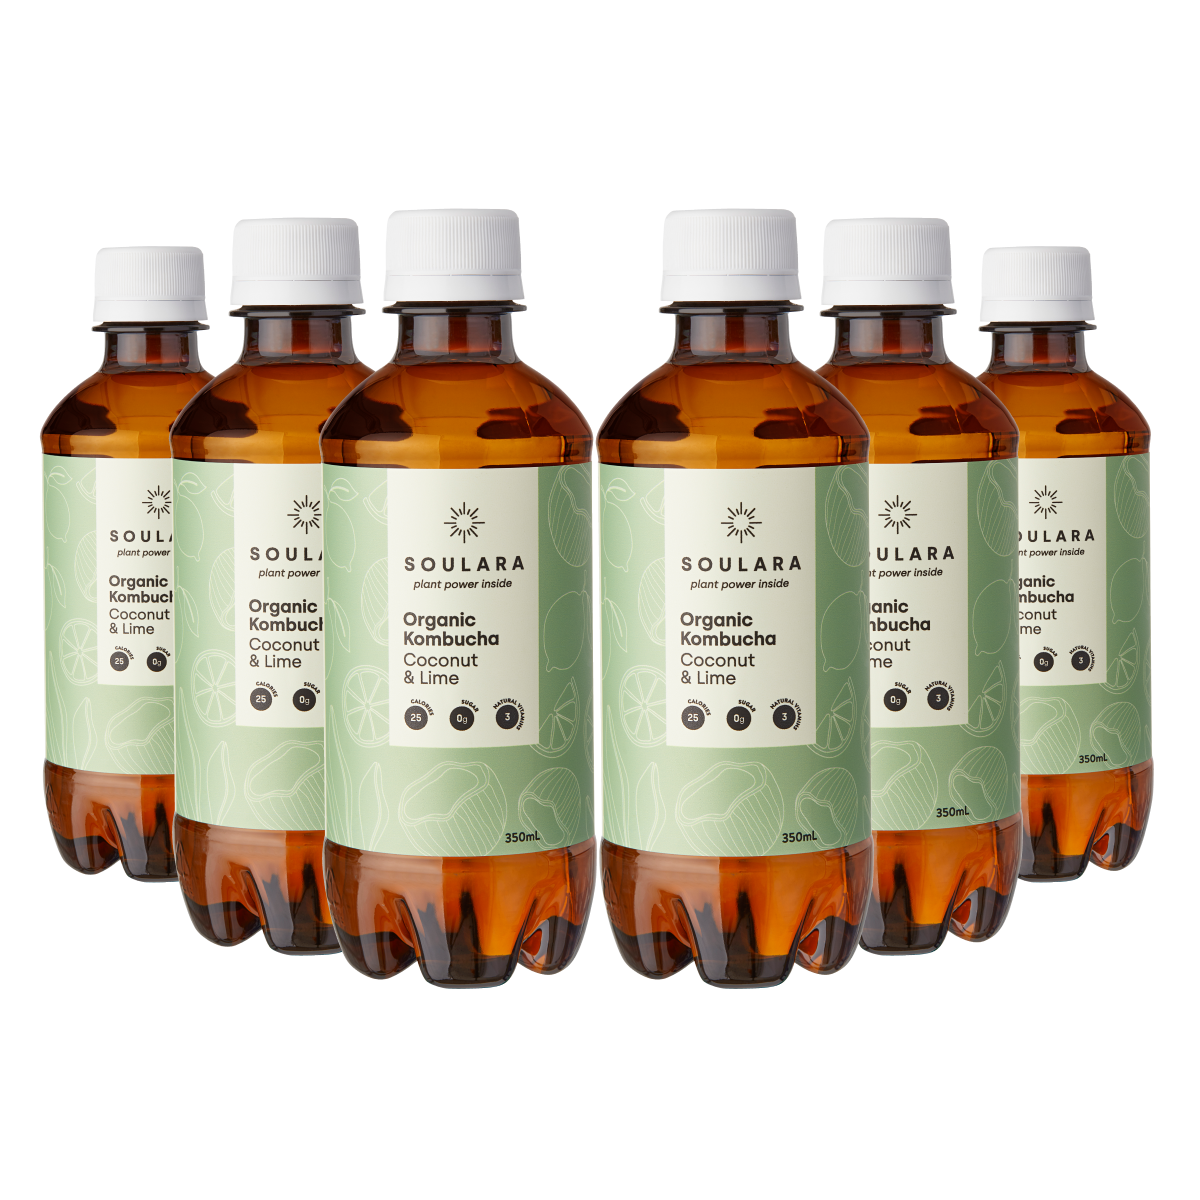 Organic coconut and lime kombucha value pack from Soulara vegan ready made meals.